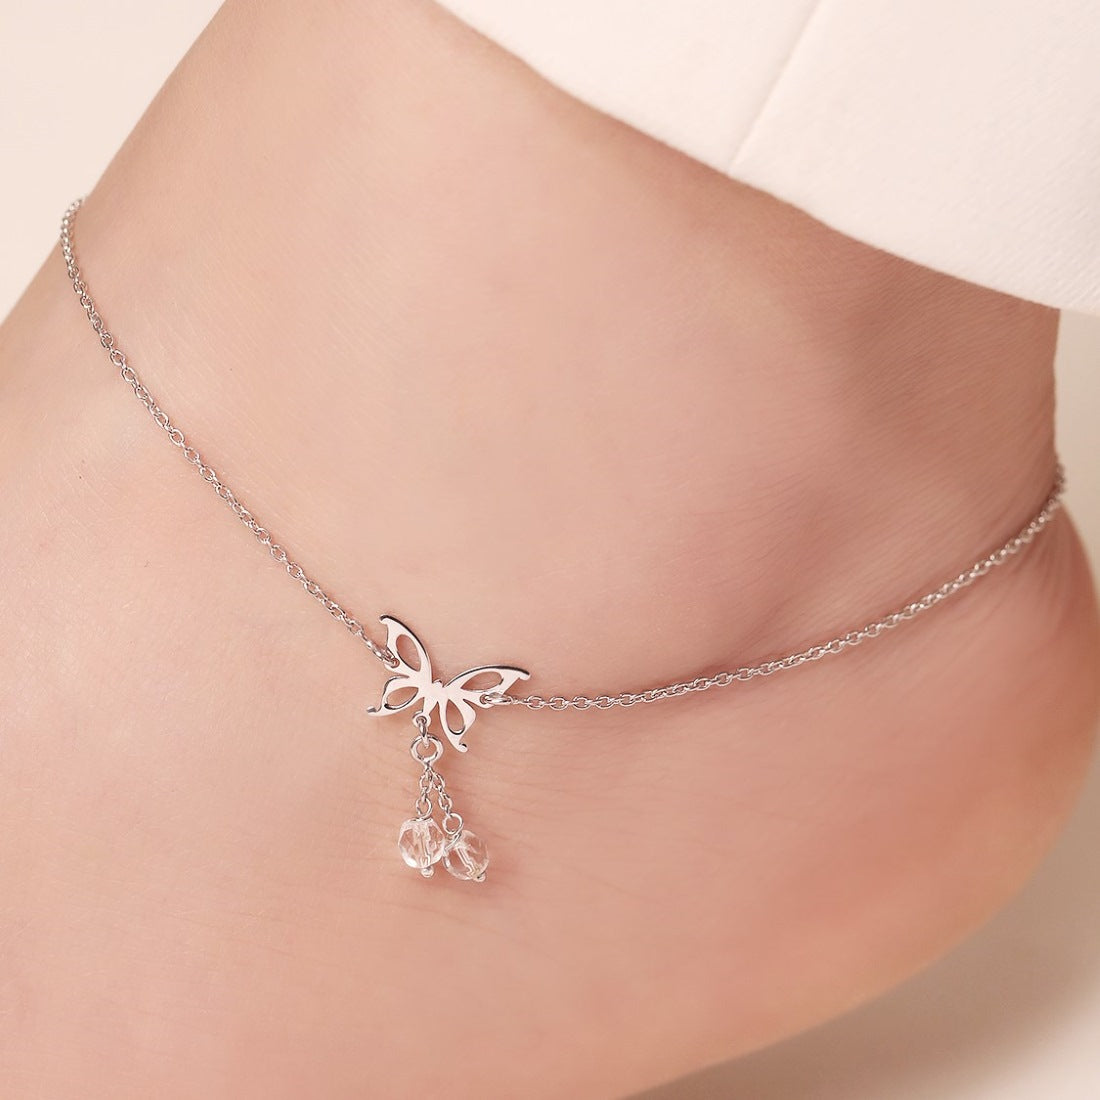 Fluttering Butterfly Dreams Rhodium-Plated 925 Sterling Silver Anklet